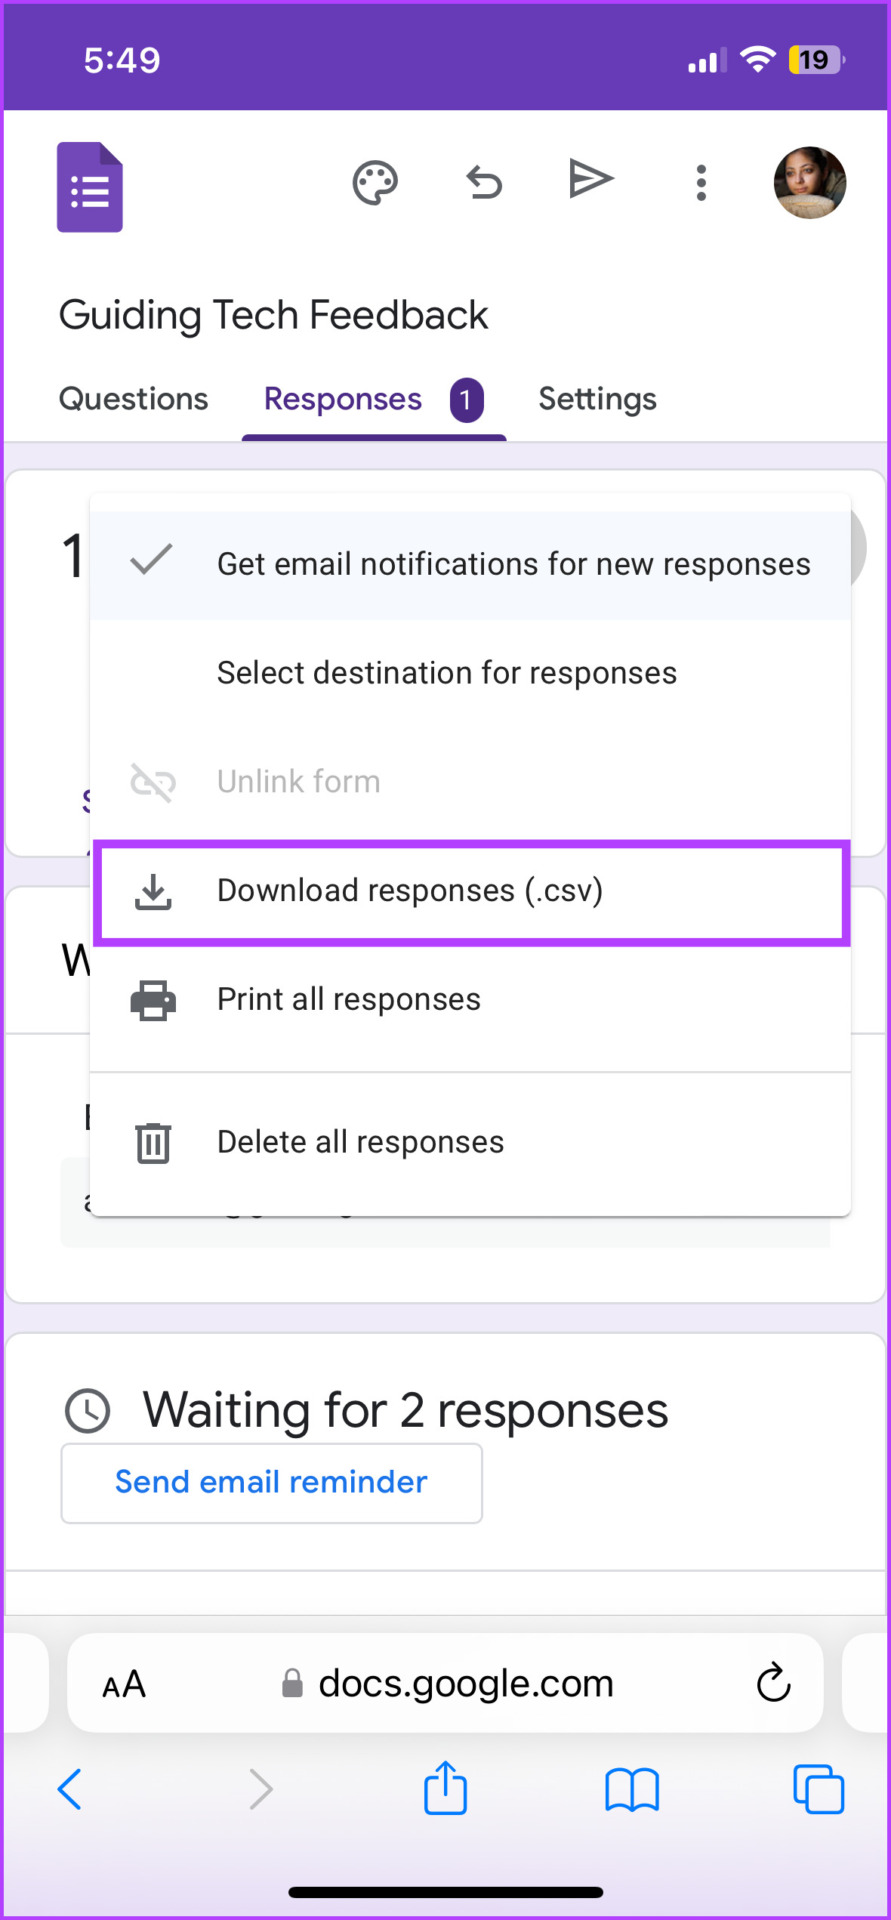 Tap the three-dot icon to export or print responses